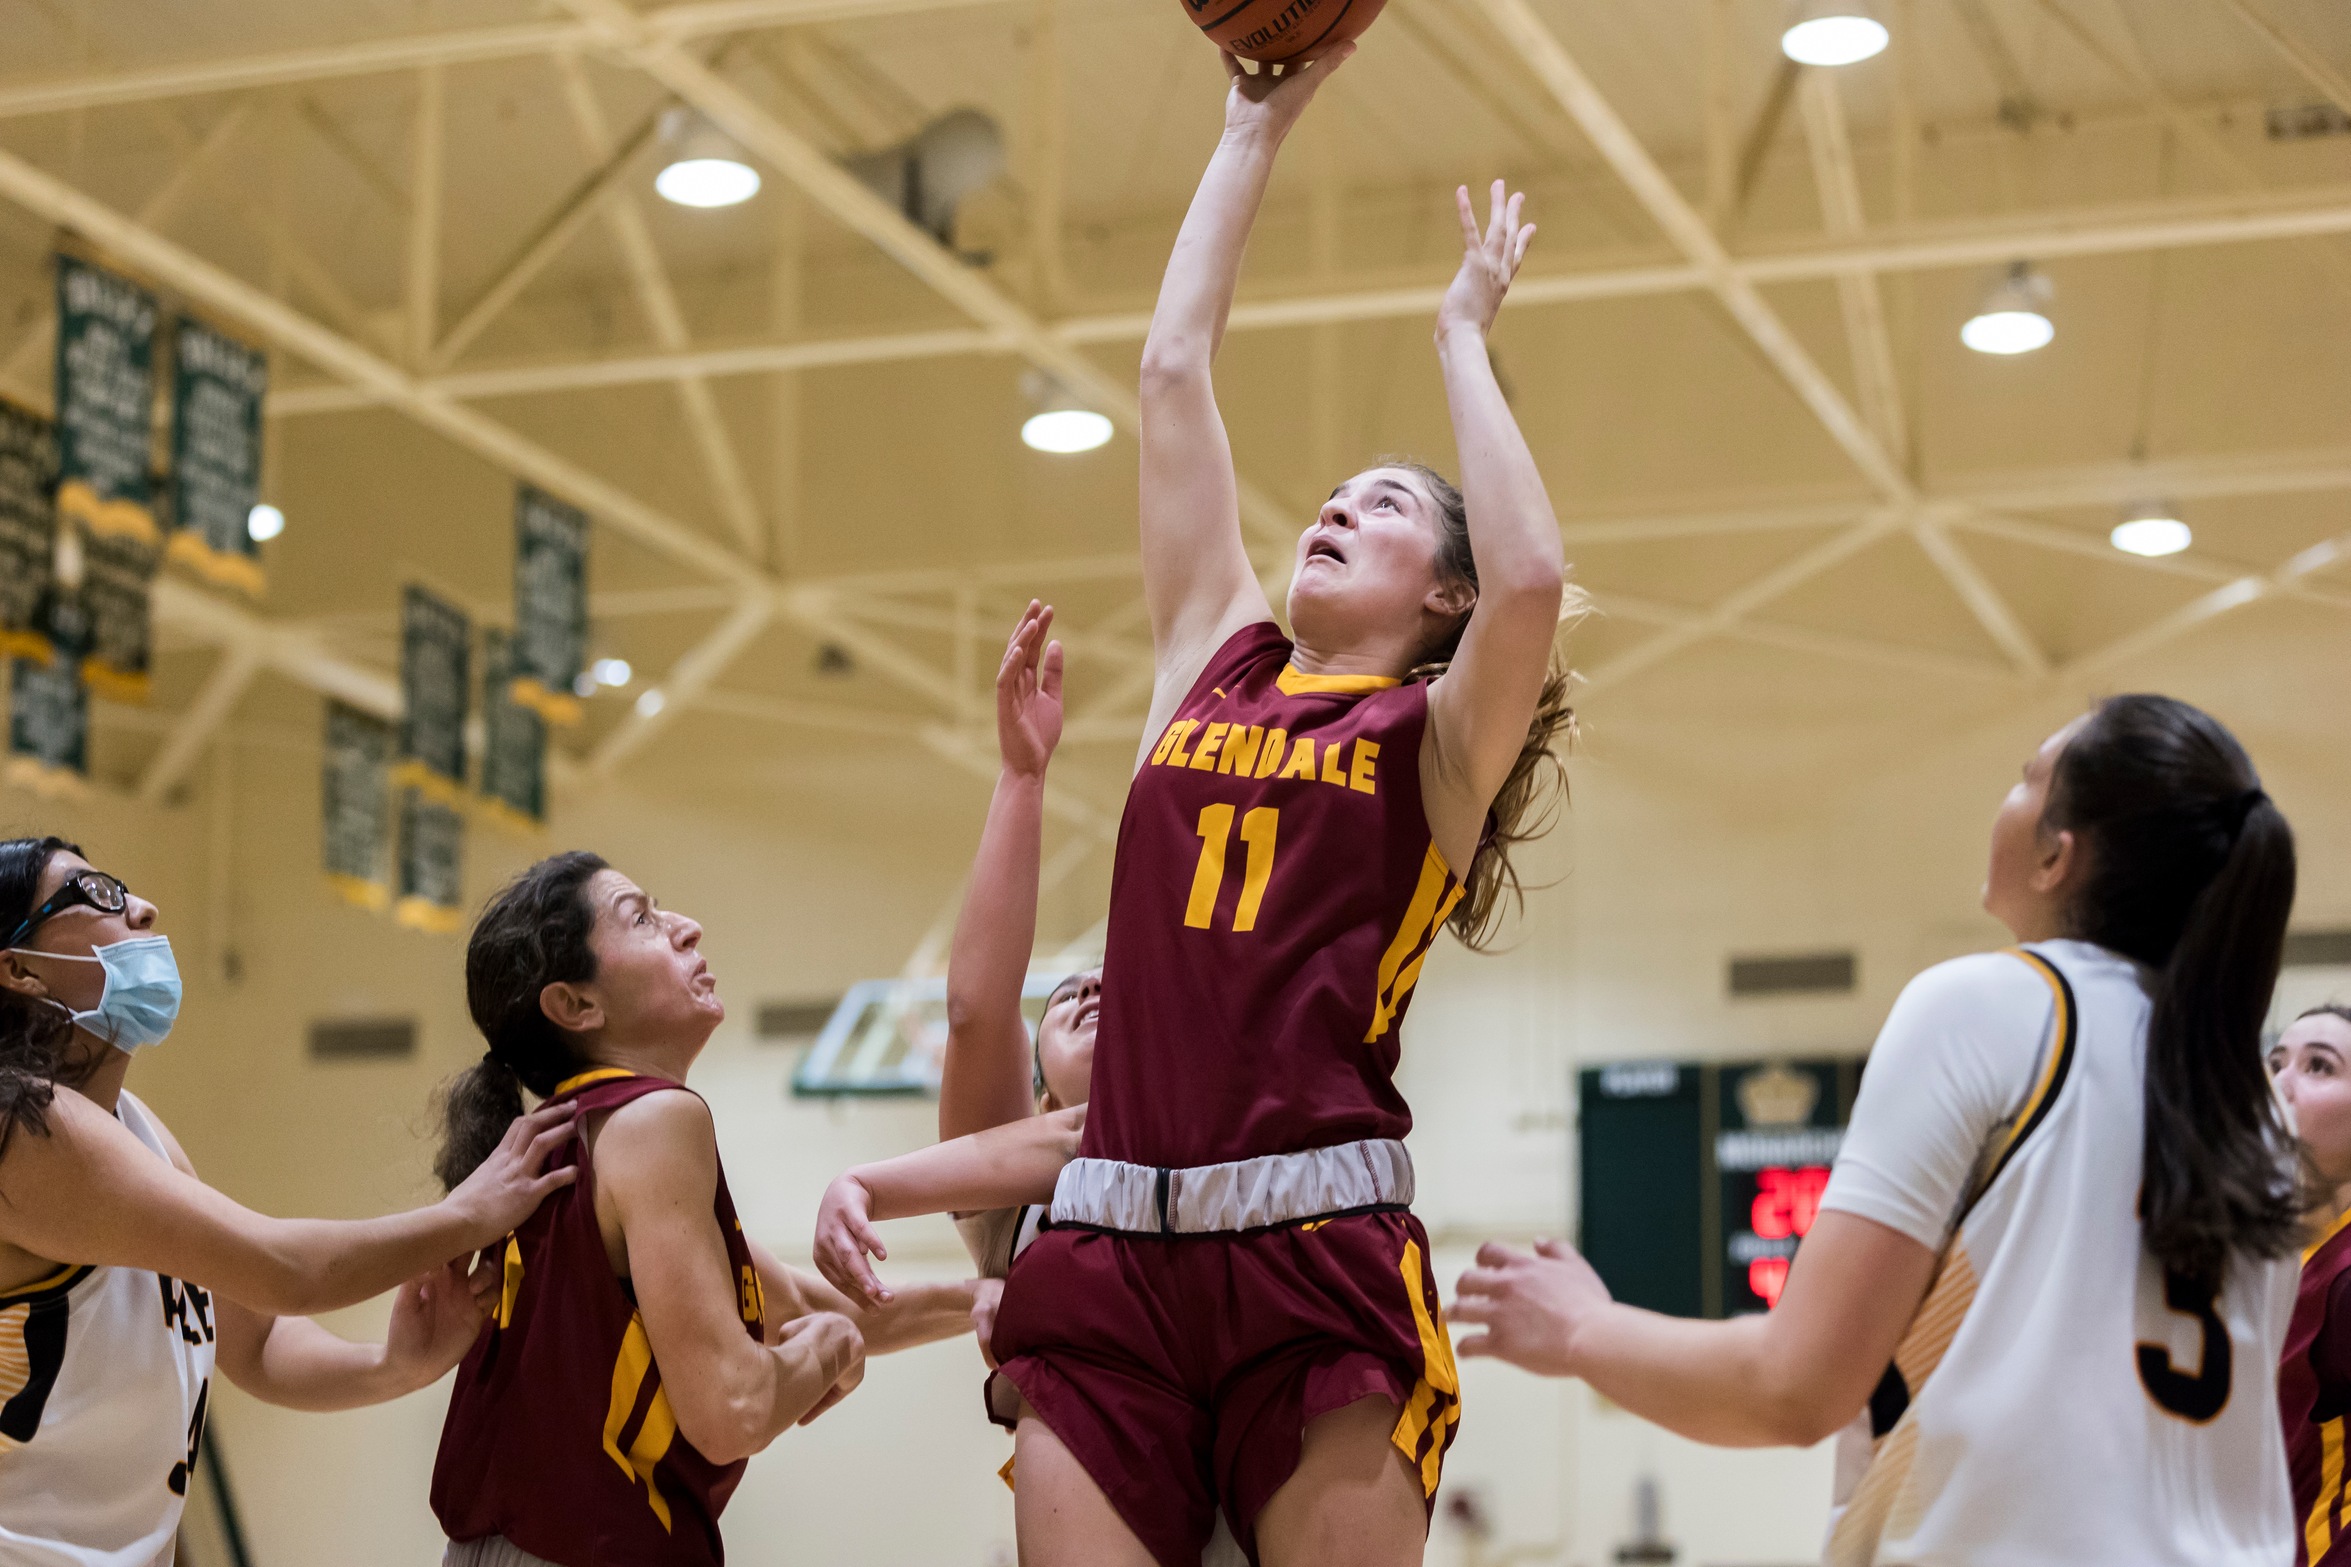 Kayla Wrobel sets school record with 20 rebounds in 51-32 win for Lady Vaqs Jan. 24